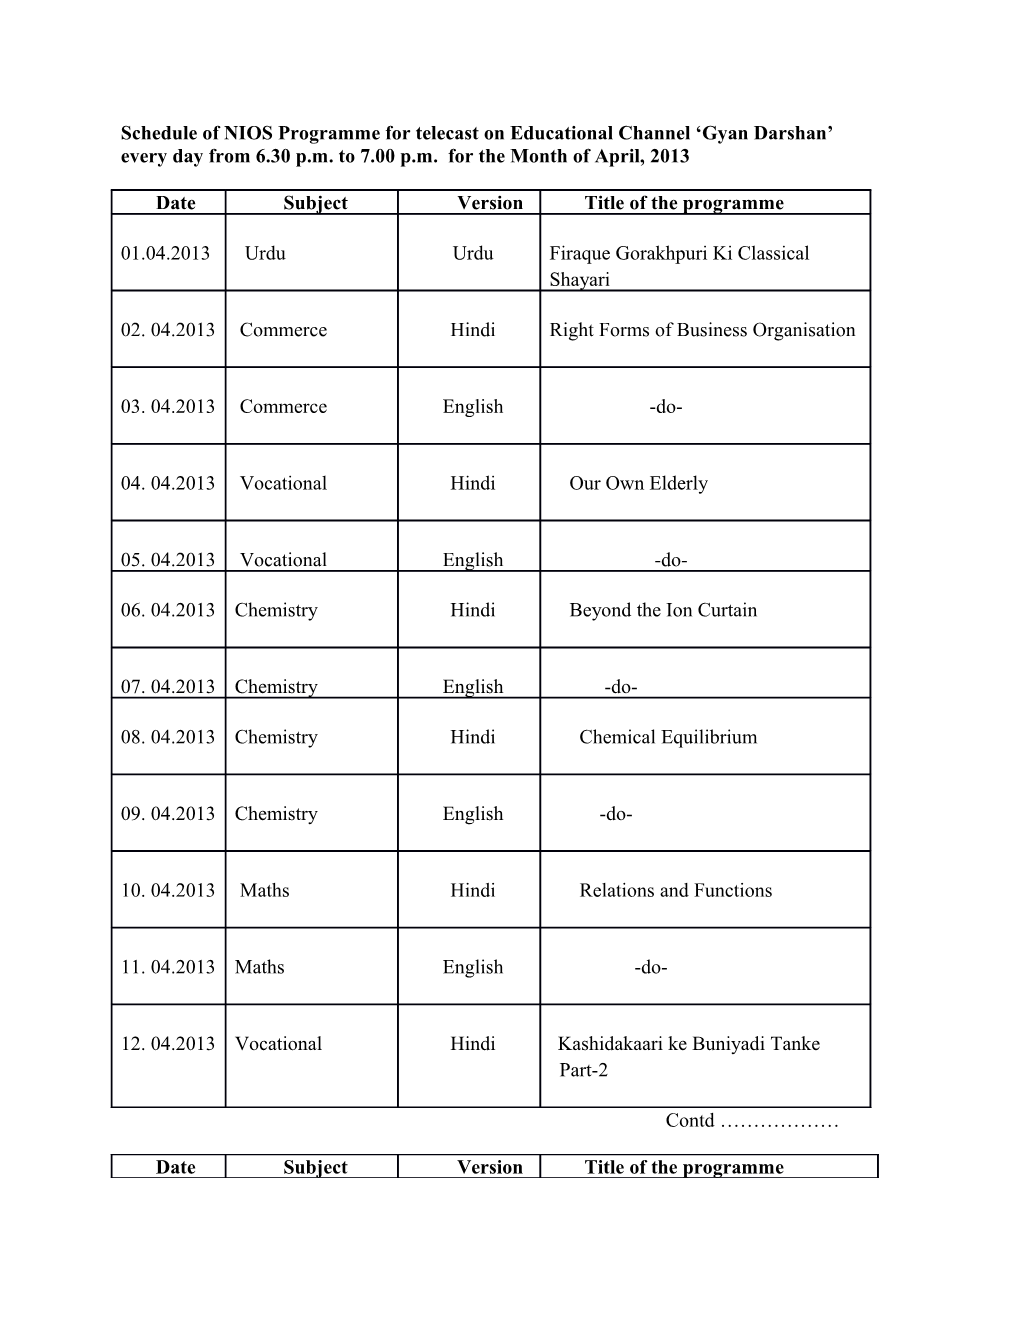 Schedule of NIOS Programme for Telecast on Educational Channel Gyan Darshan